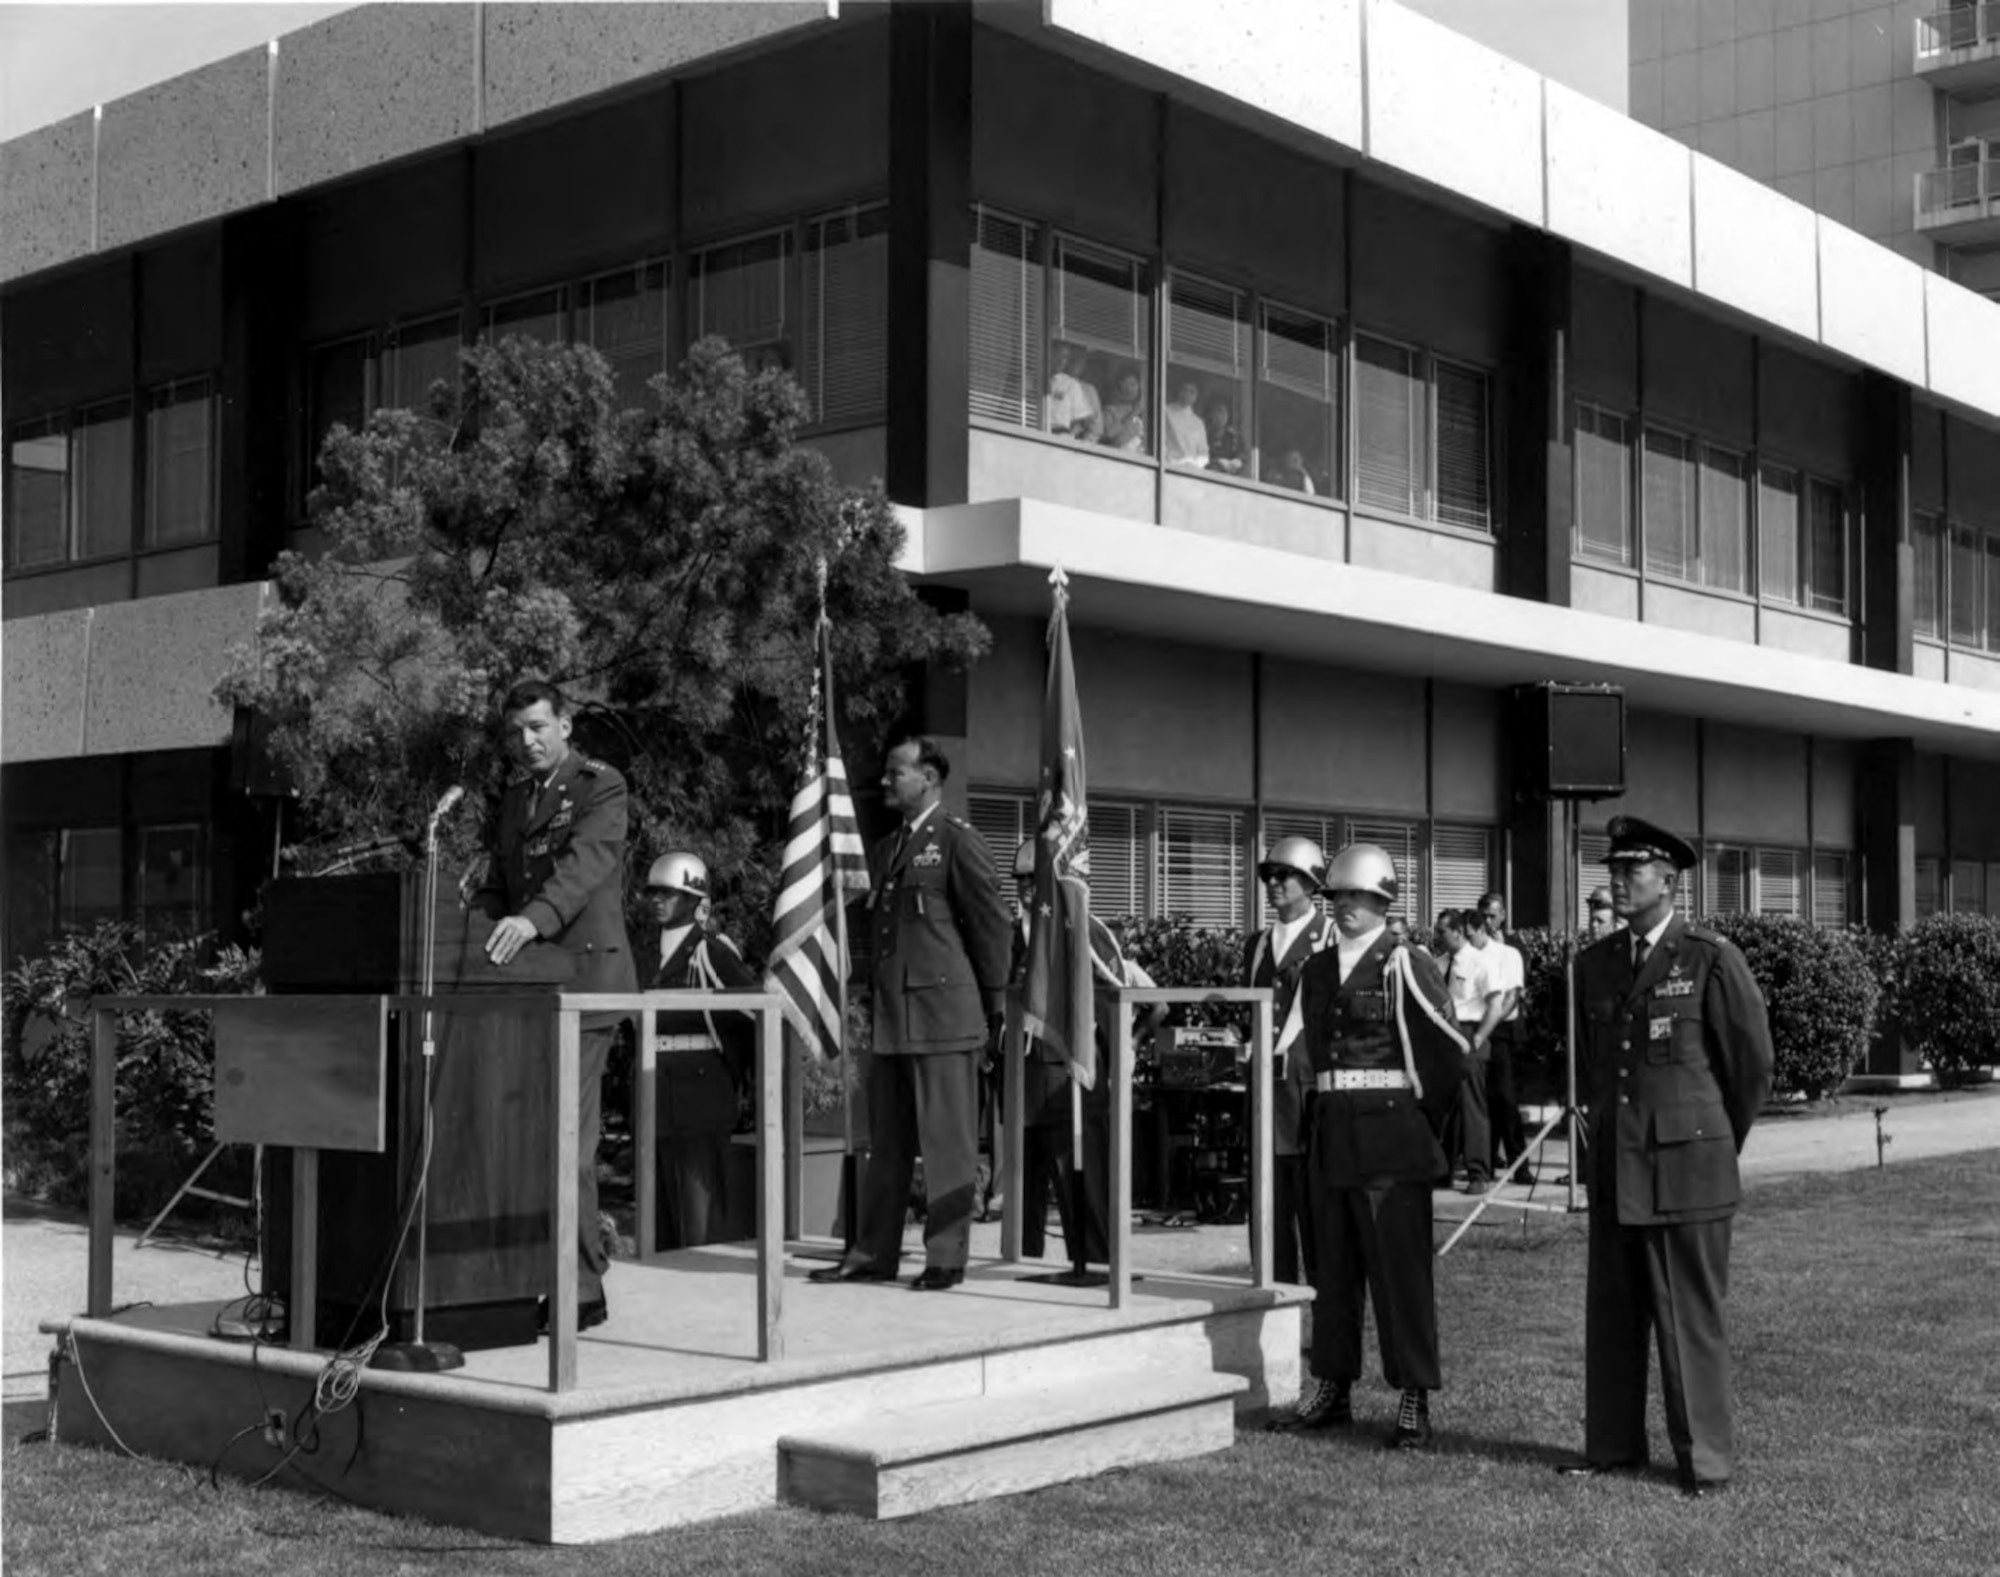 General Bernard A. Schriever, commander of Air Force Systems Command, addresses an assembled crowd in the Area A mall during the dedication of Los Angeles Air Force Station on July 10, 1964. Standing directly behind Gen. Schriever is Maj. Gen. Ben I.Funk, commander of Space Systems Division. Col. Roy Russell, commander of Los Angeles AFS, stands on the far right by the Air Force Honor Guard. (U.S. Air Force photo)